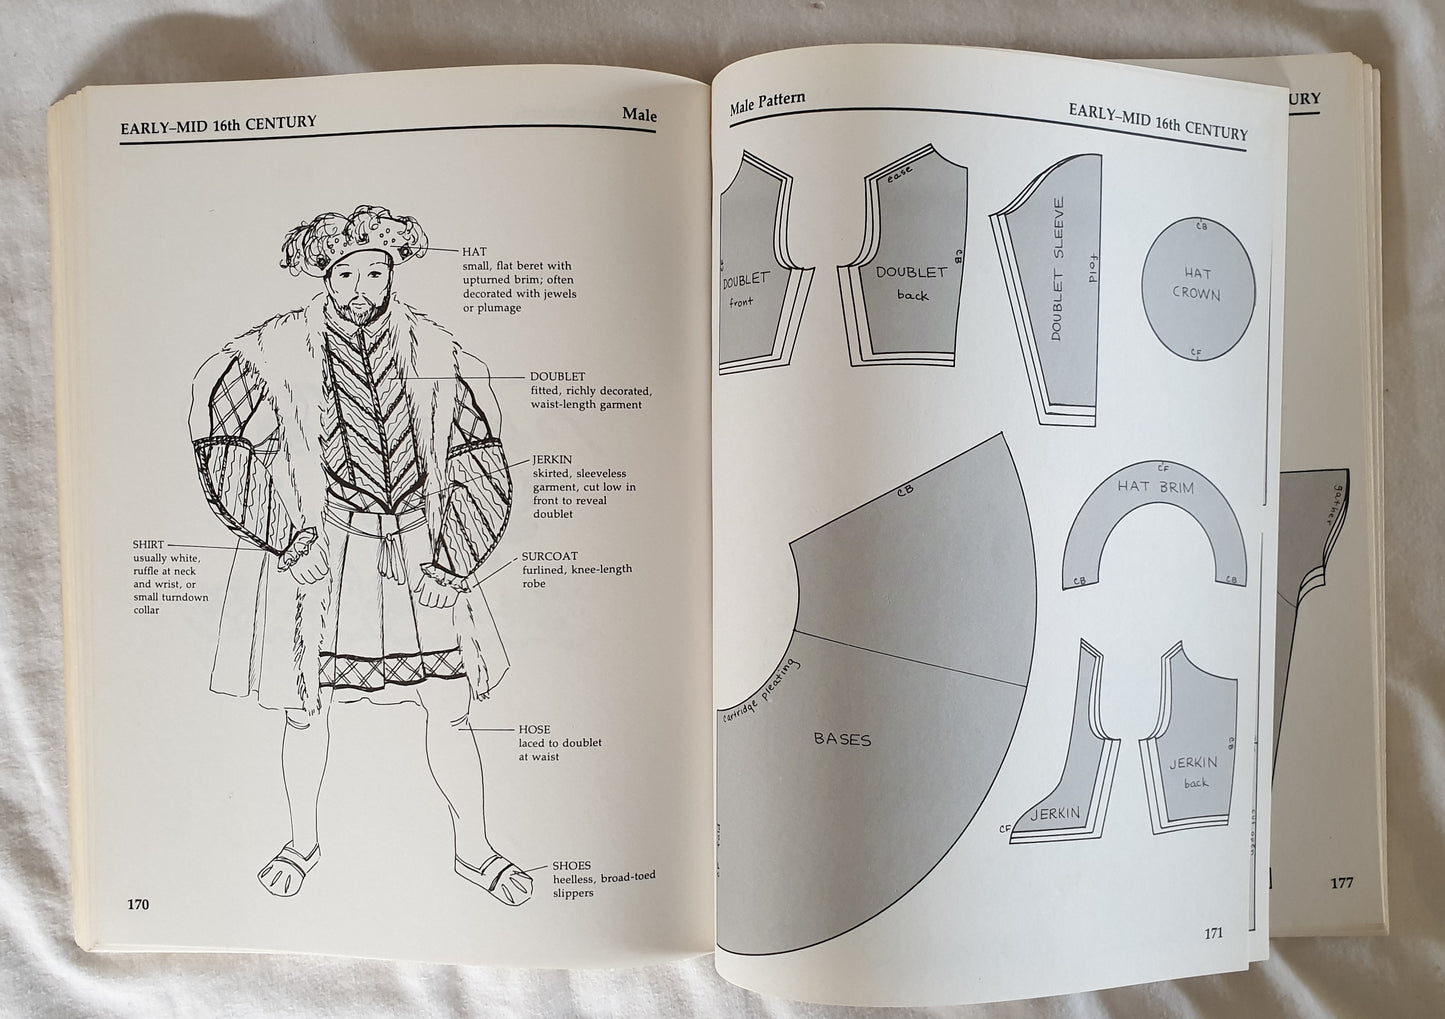 Patterns for Theatrical Costumes by Katherine Strand Holkeboer